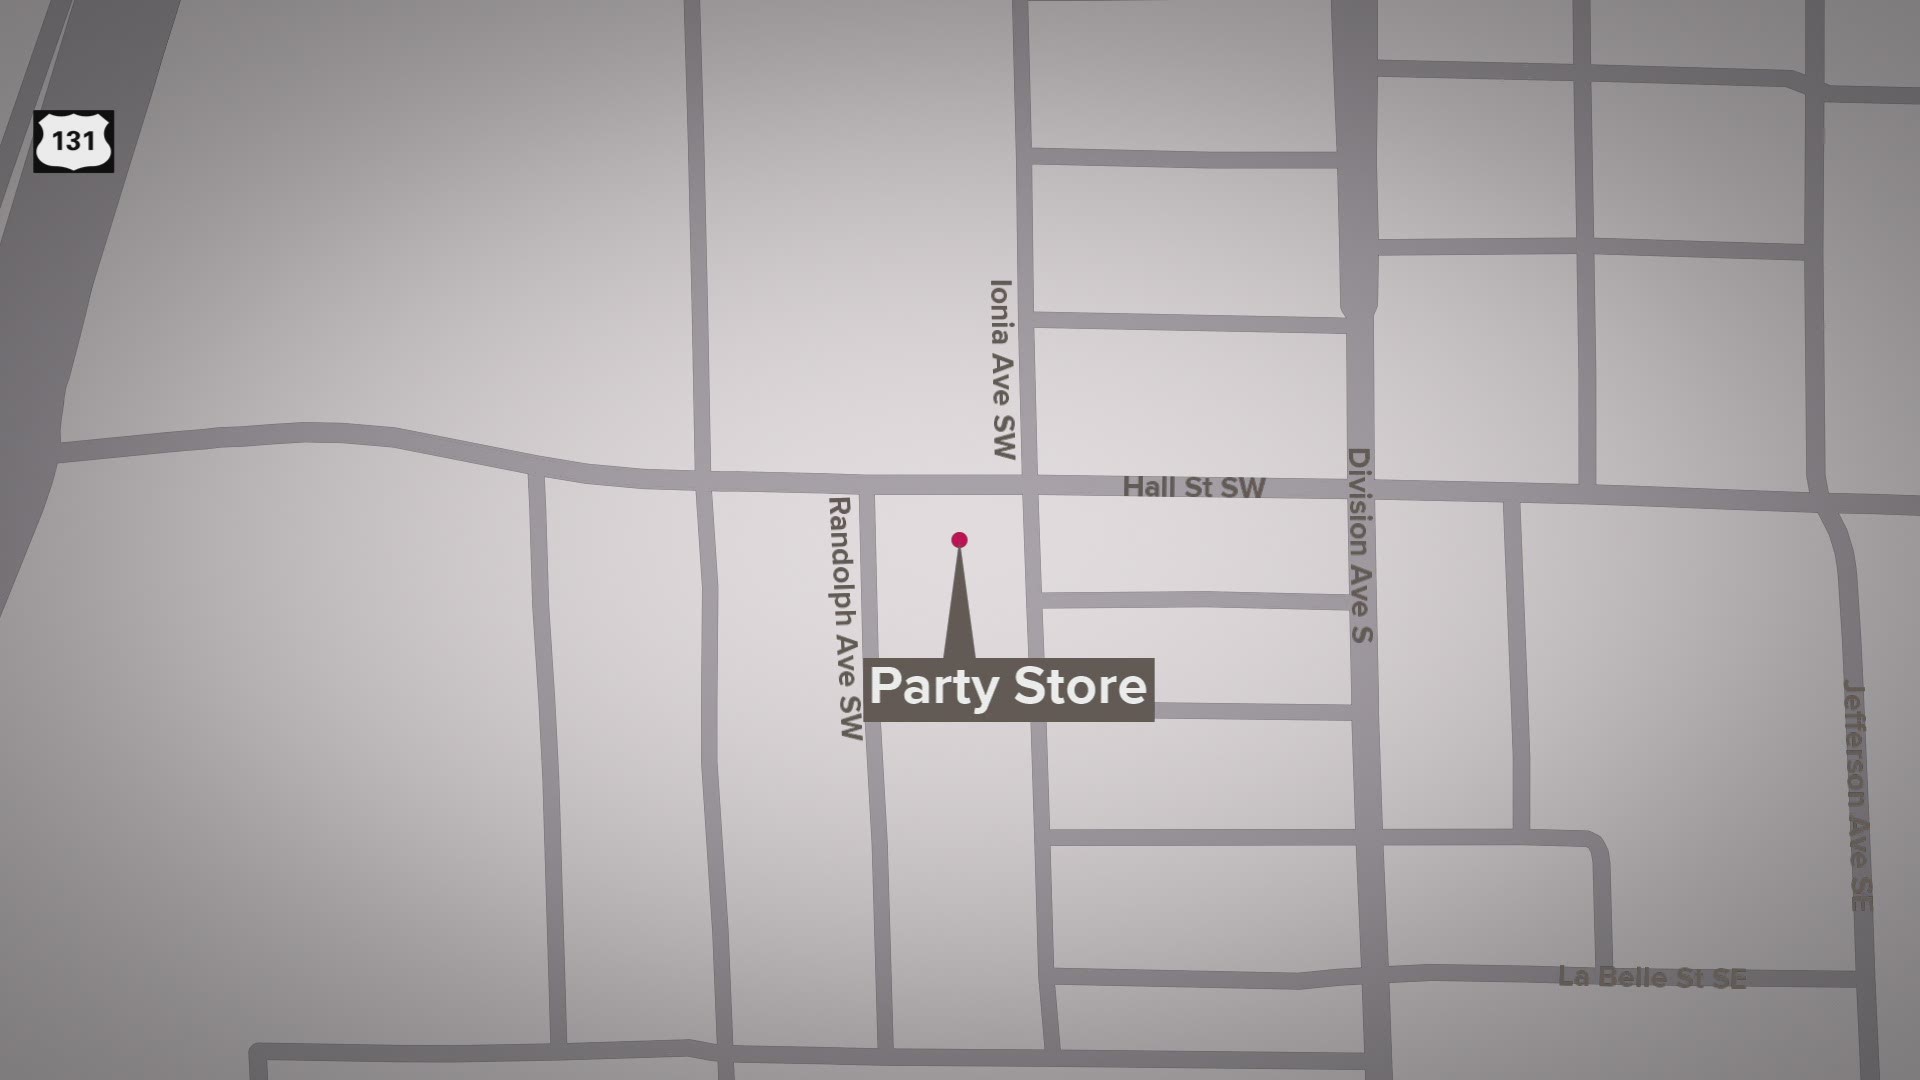 On Saturday, around 11:25 p.m. the Grand Rapids Police Department responded to the Hall Street Party Store on several calls of a shooting that had just occurred.